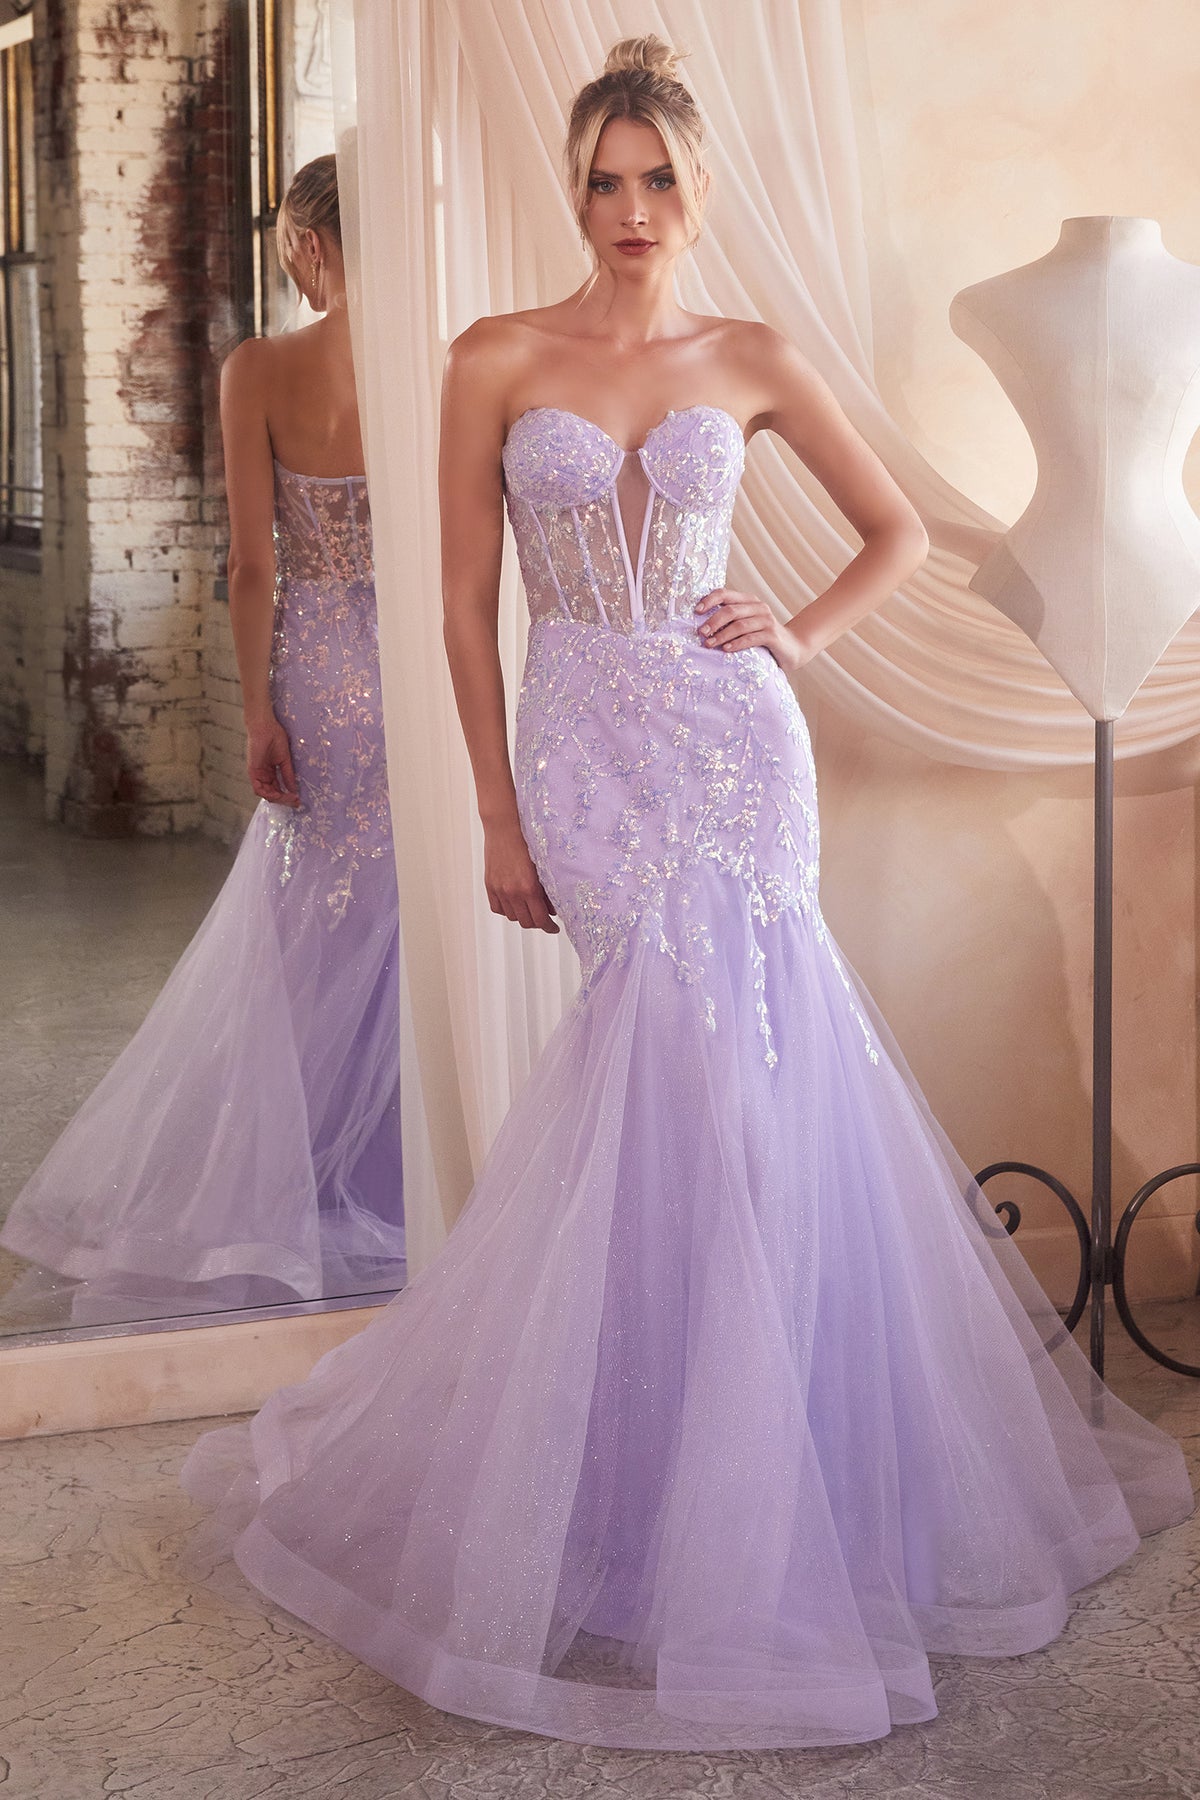 Cinderella Divine CB139 Ladivine Strapless Embellished Mermaid Gown - NORMA REED